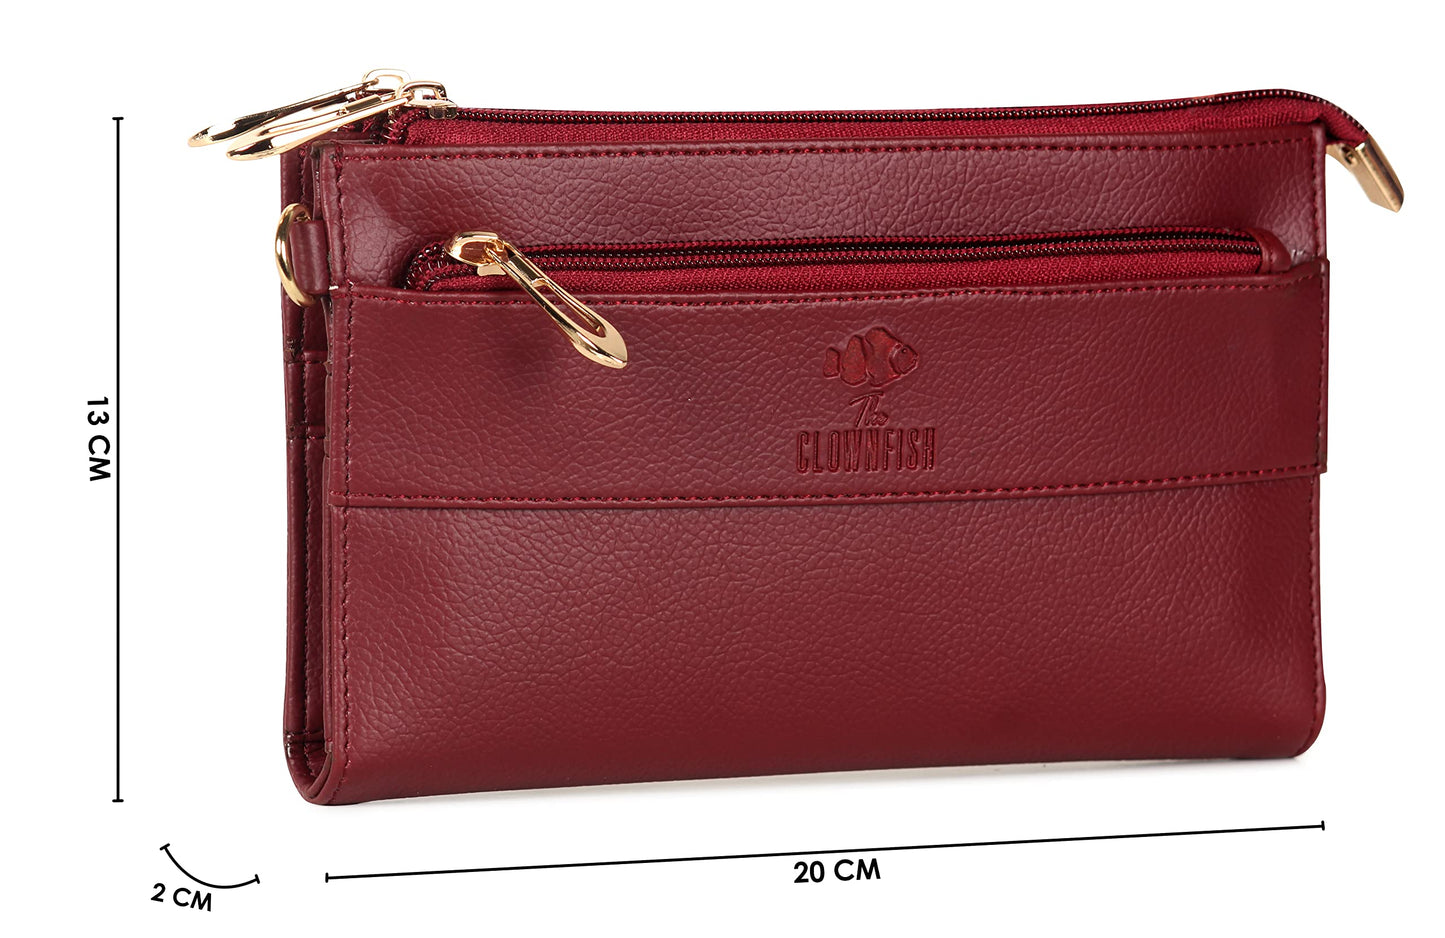 THE CLOWNFISH Priscilla Collection Womens Wallet Clutch Sling Bag Ladies Purse with Multiple Card holders (Maroon)